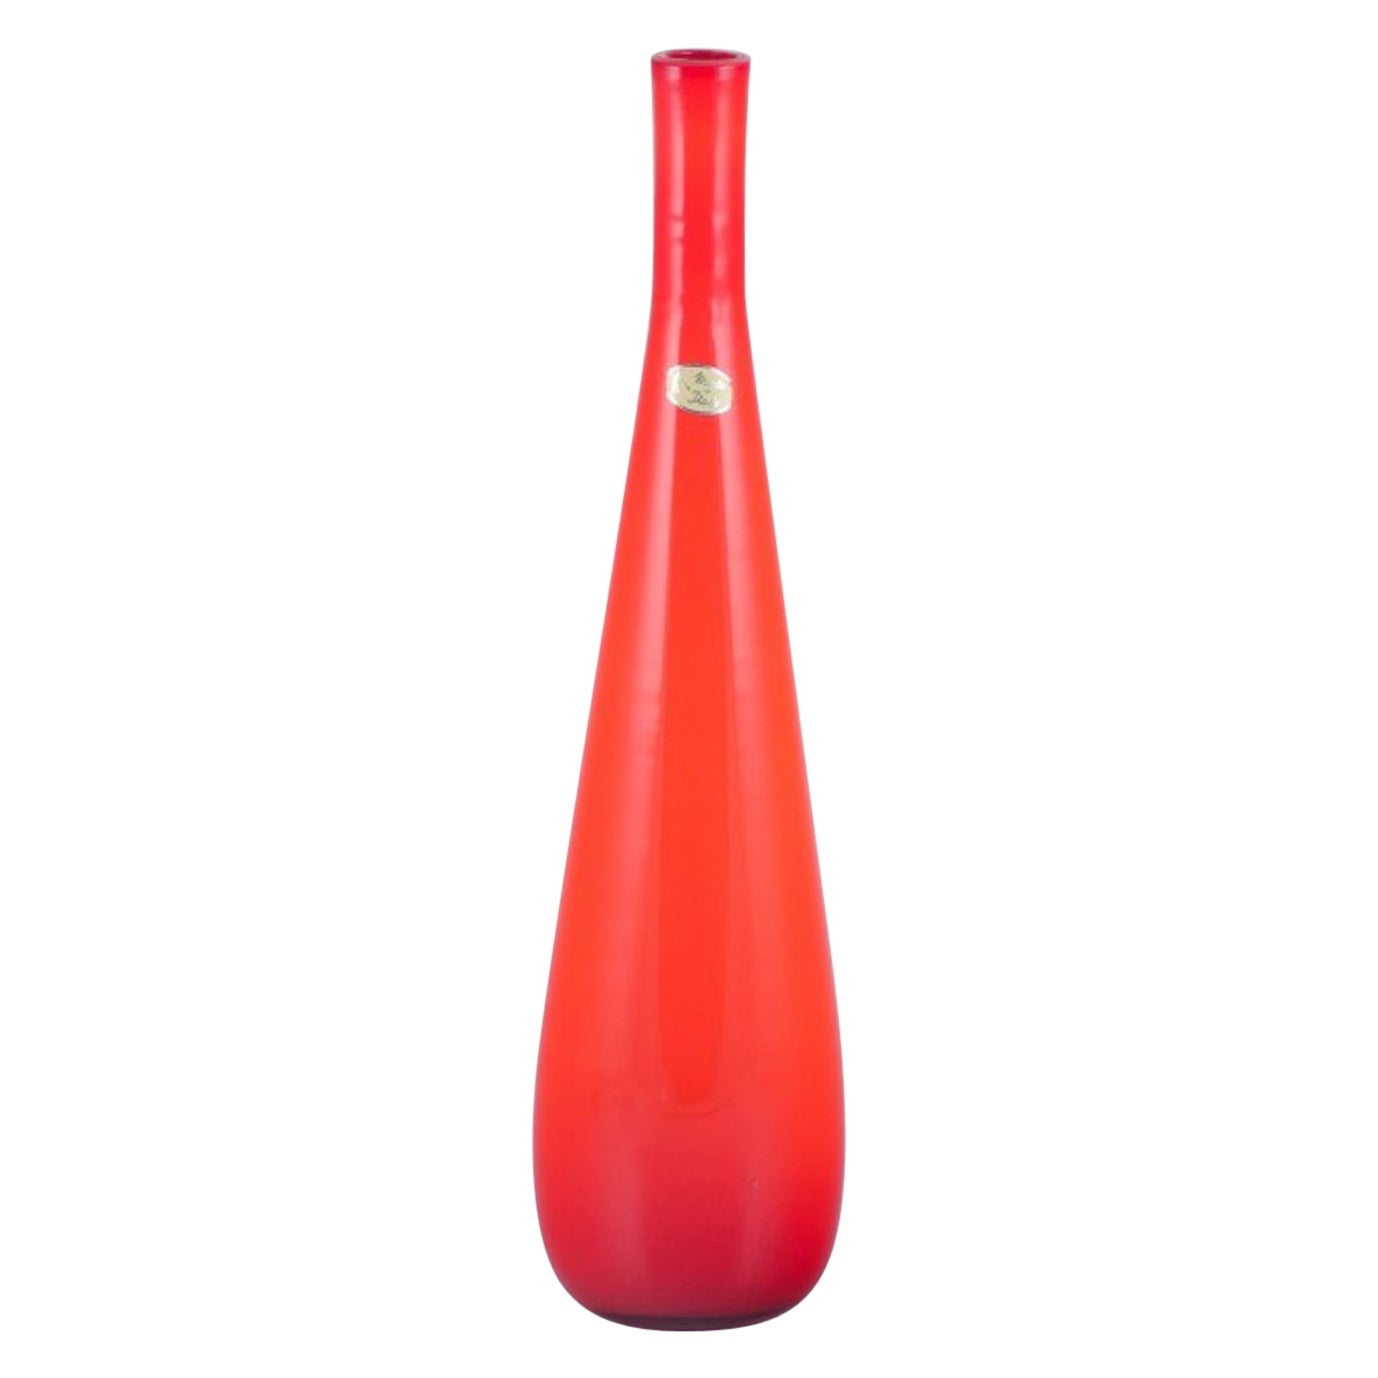 Murano, Italy. Large art glass vase with a slender neck in orange glass. For Sale